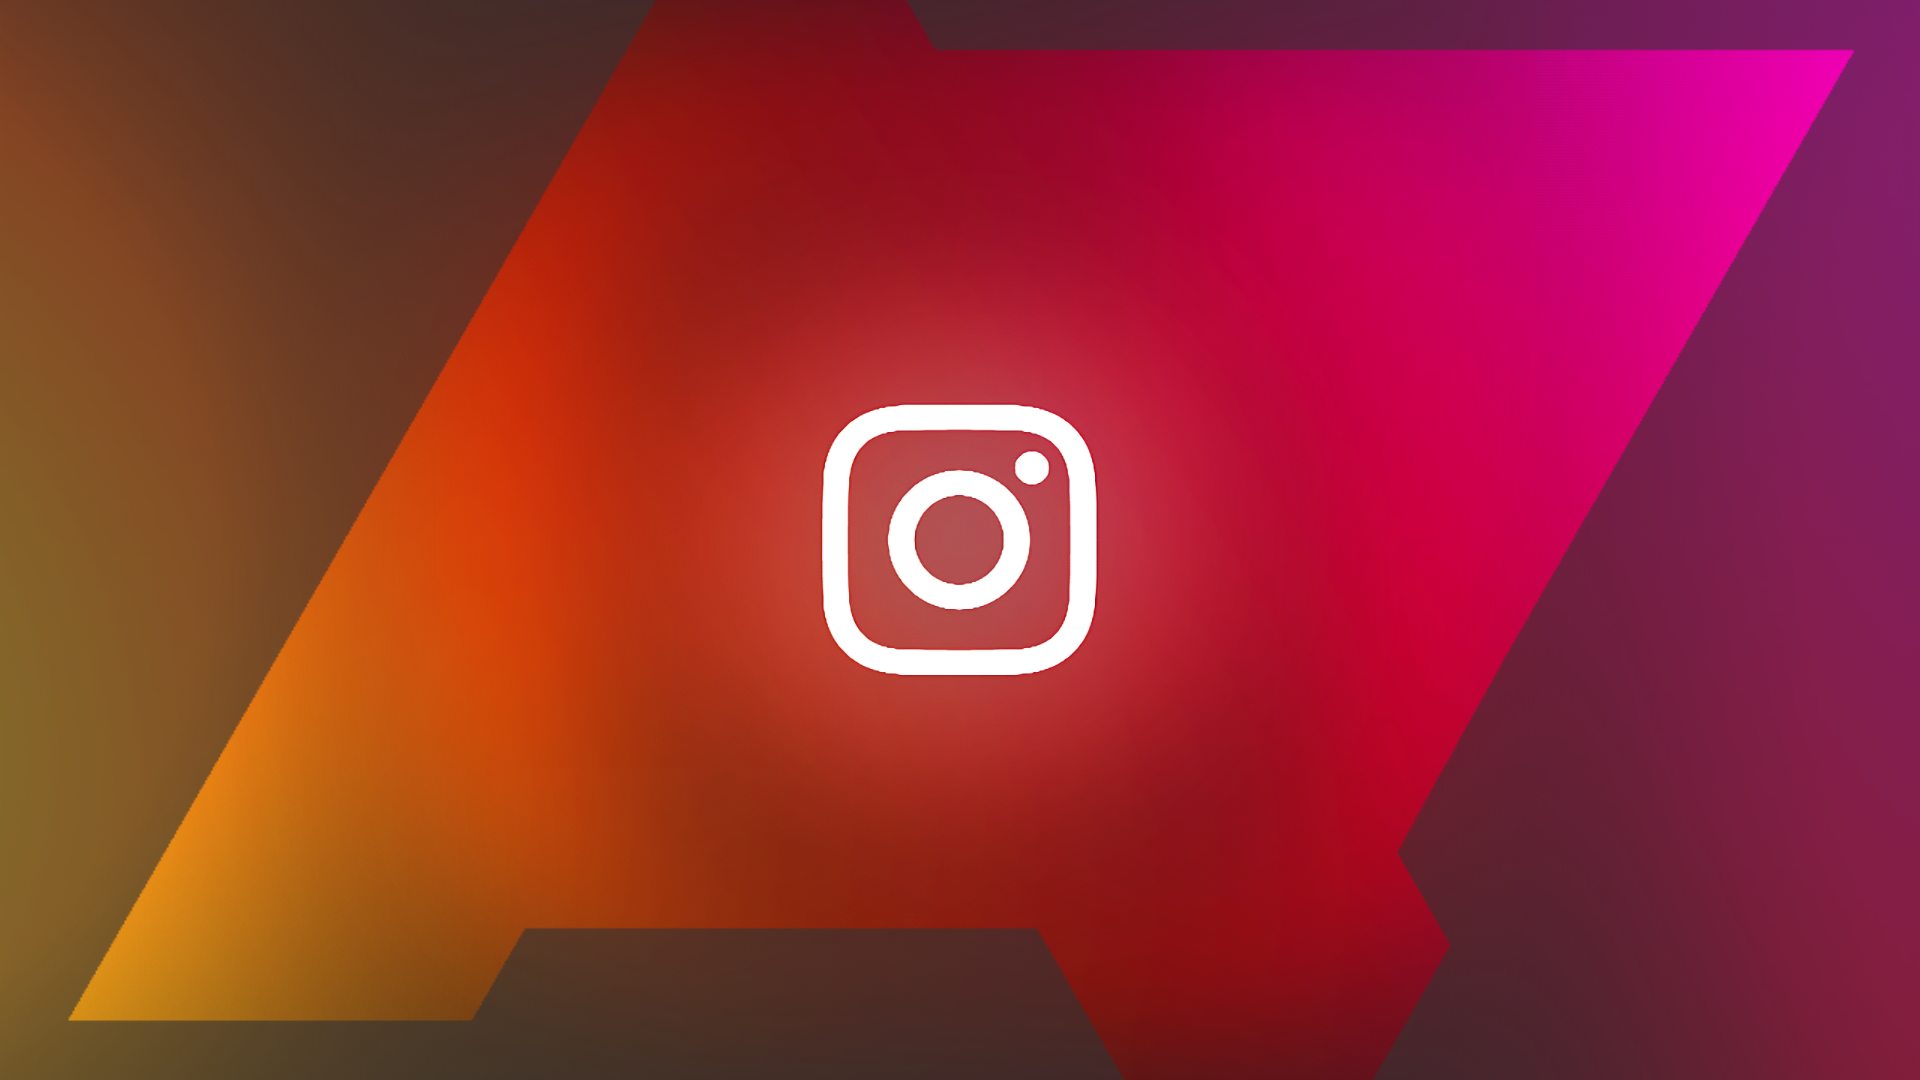 The Instagram logo on a red background. The logo is inside a silhouette of the Android Police logo.